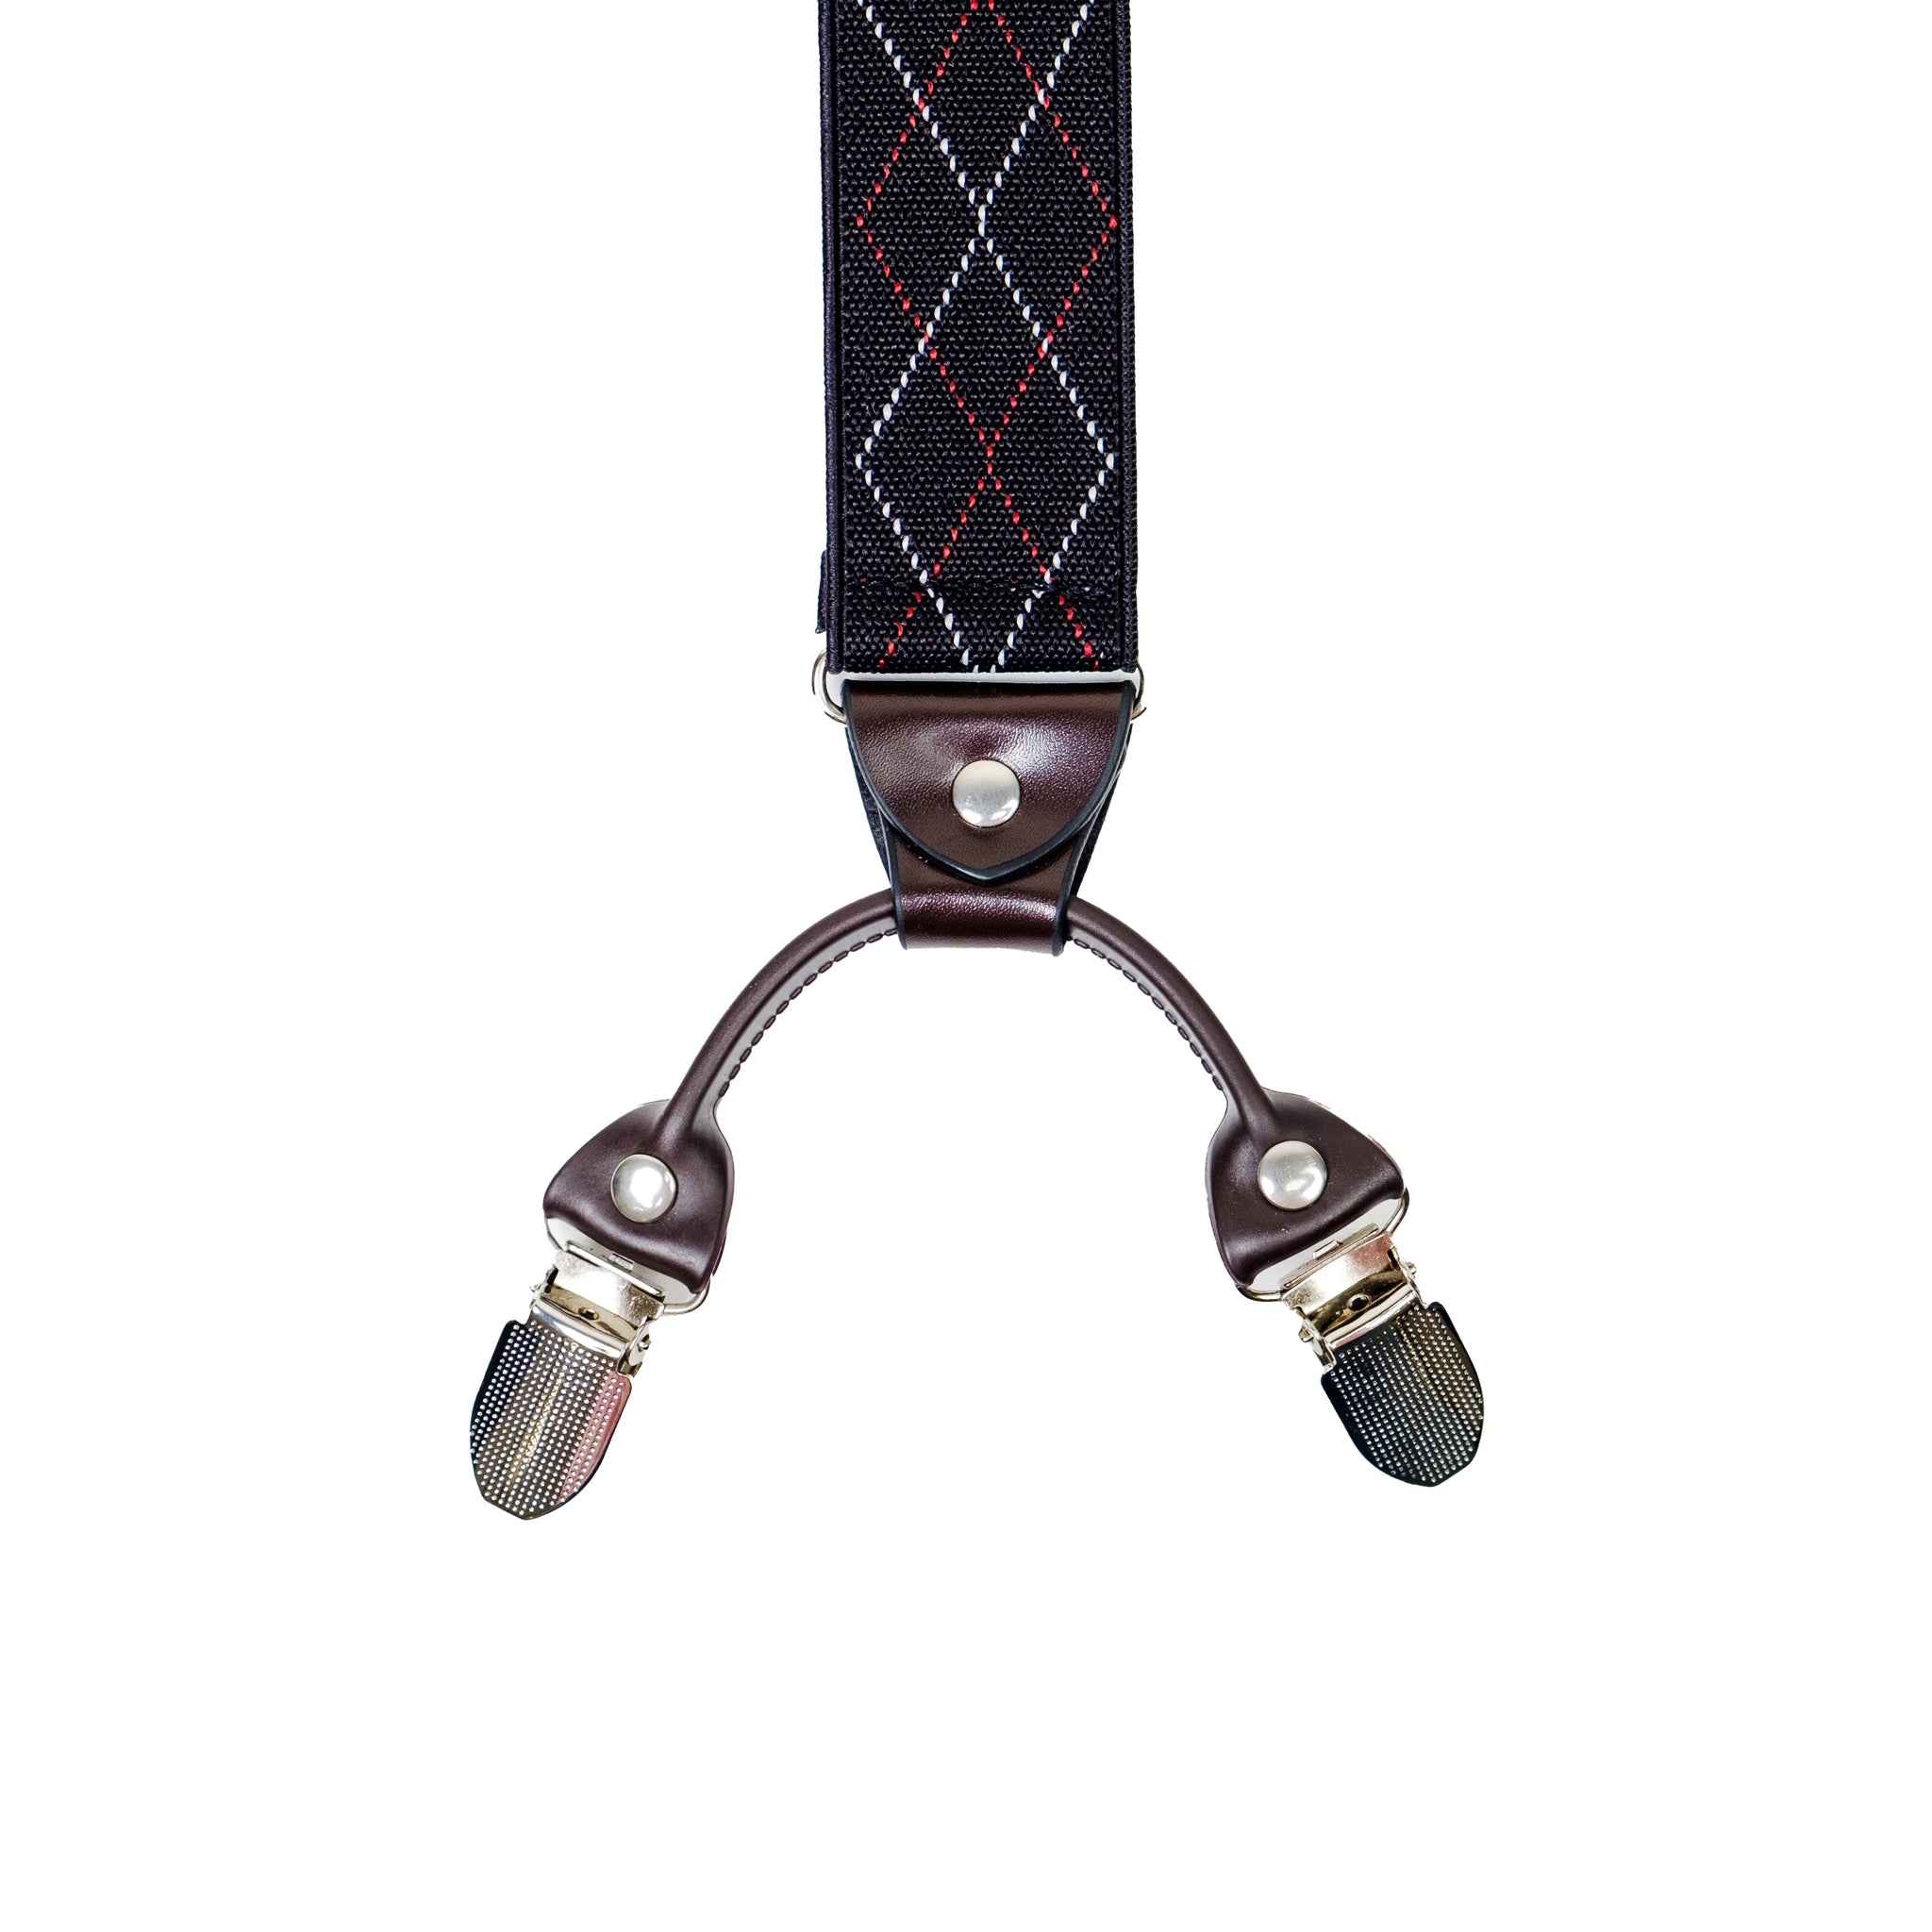 Chokore Stretchy Y-shaped Suspenders with 6-clips (Black & Gray)